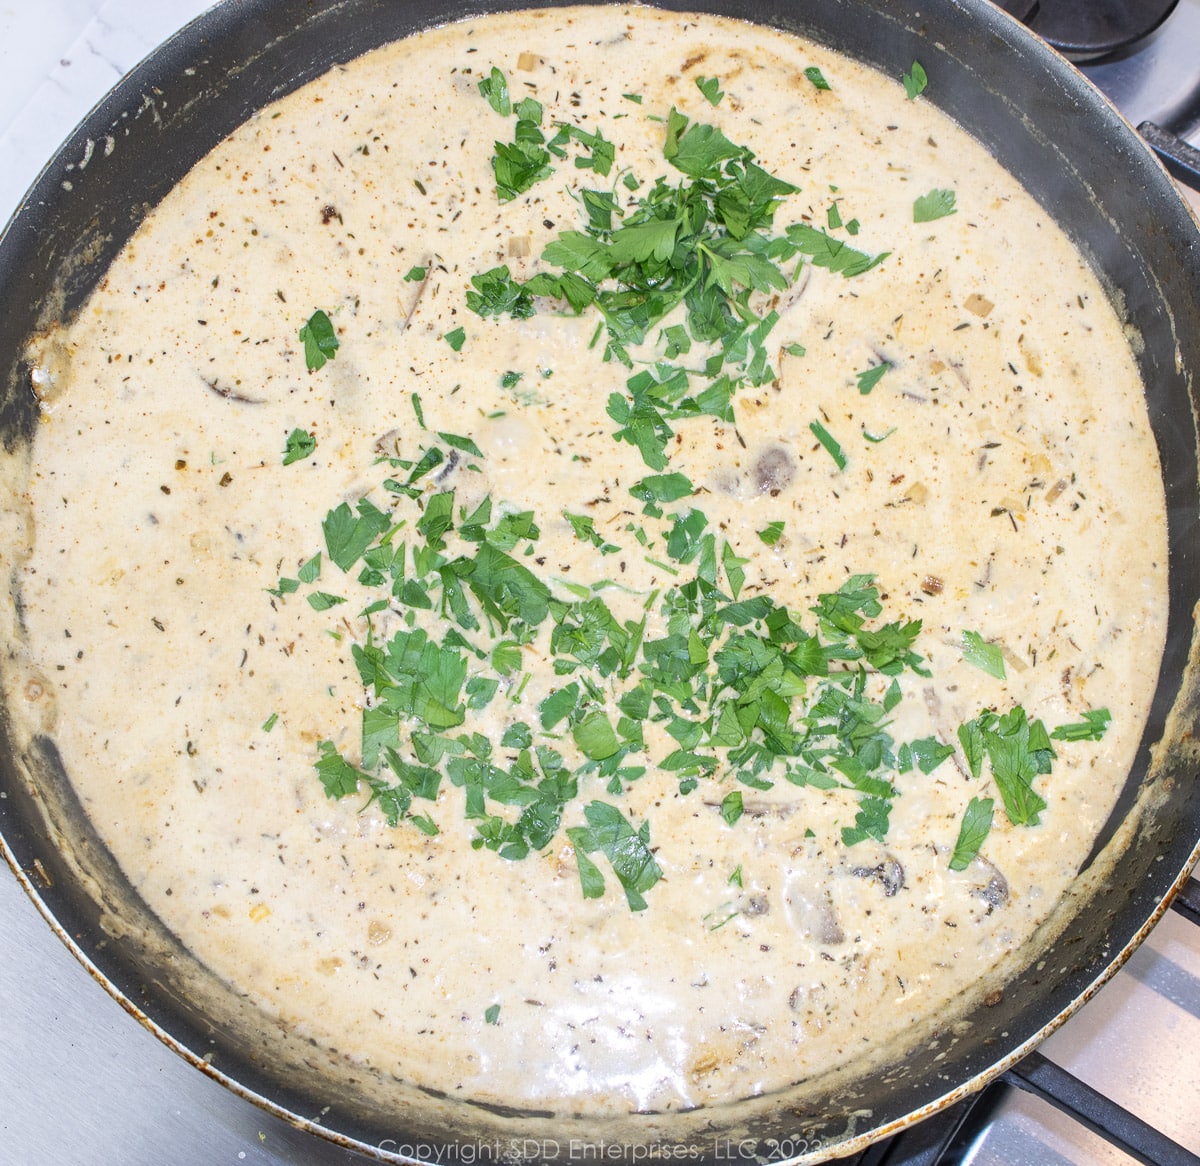 parsley added to a cream sauce in a skillet.